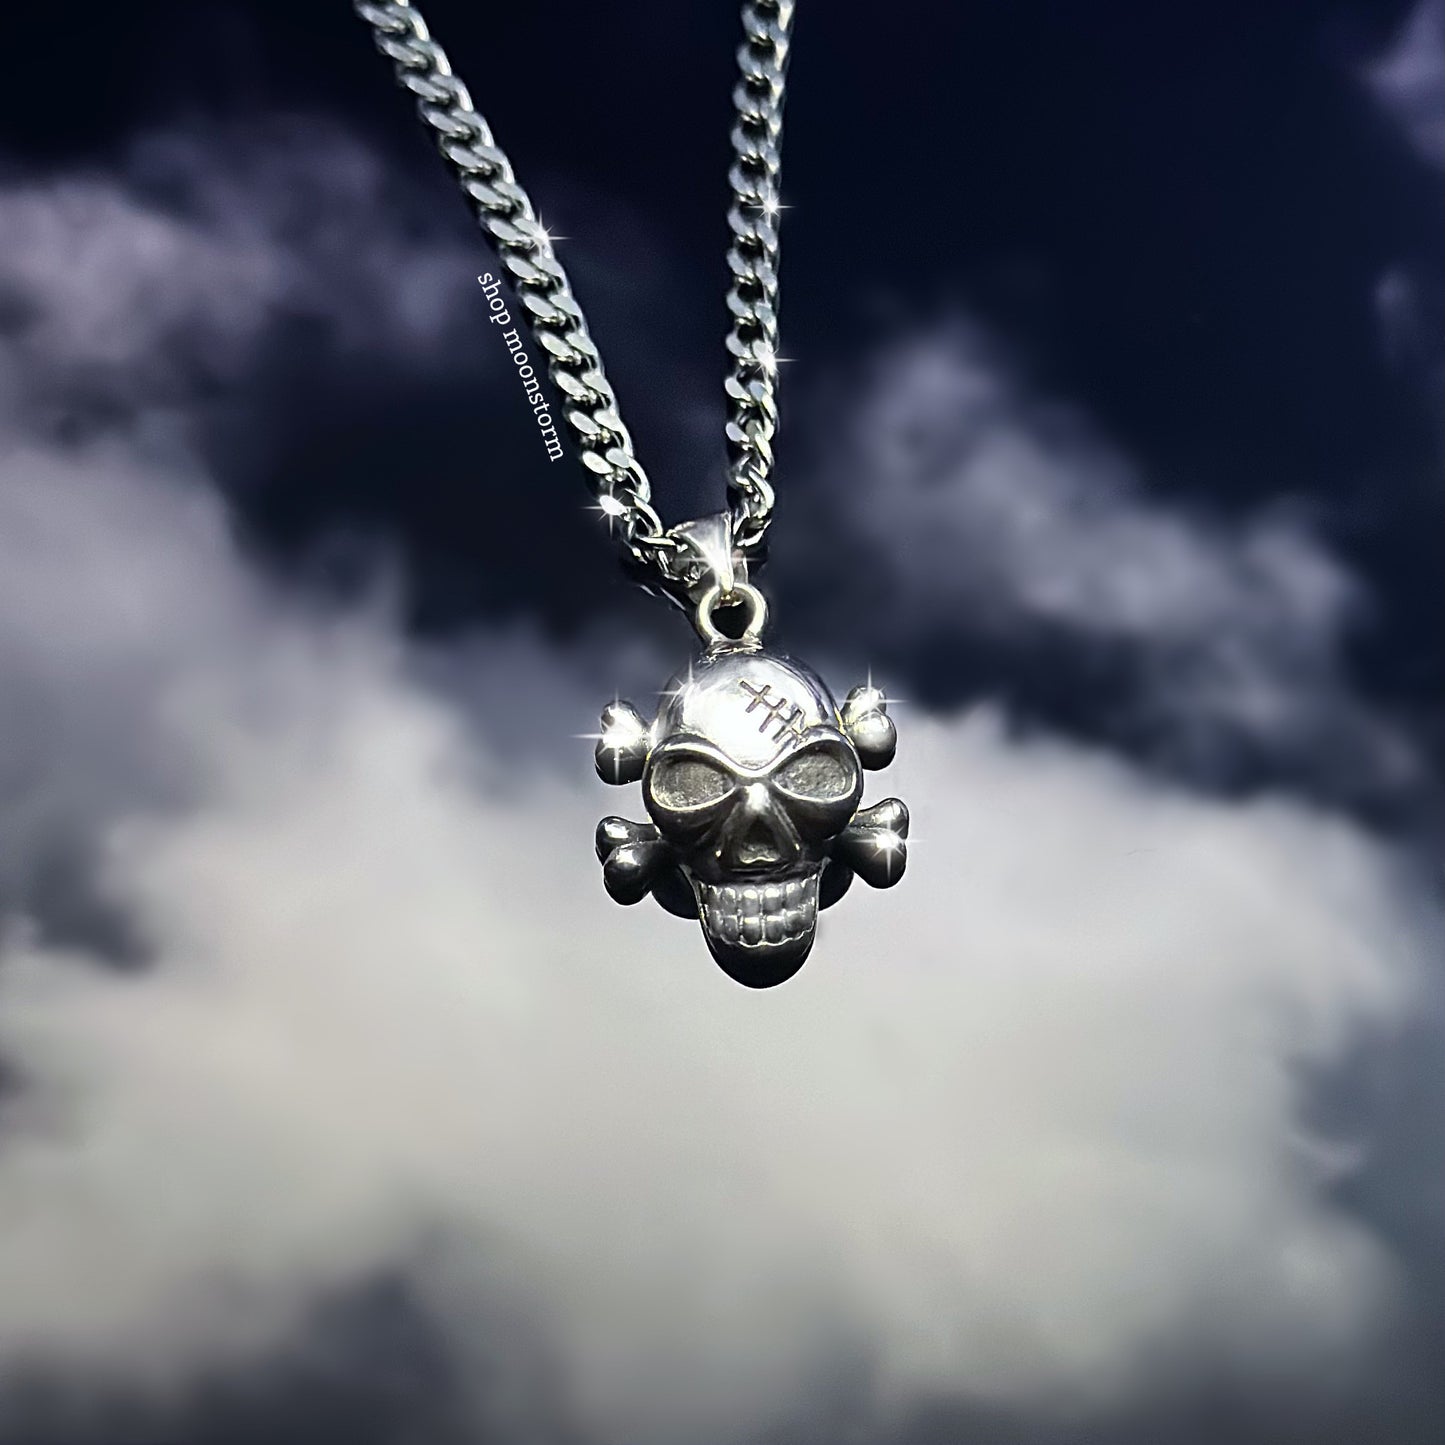 Stitched Skull Necklace